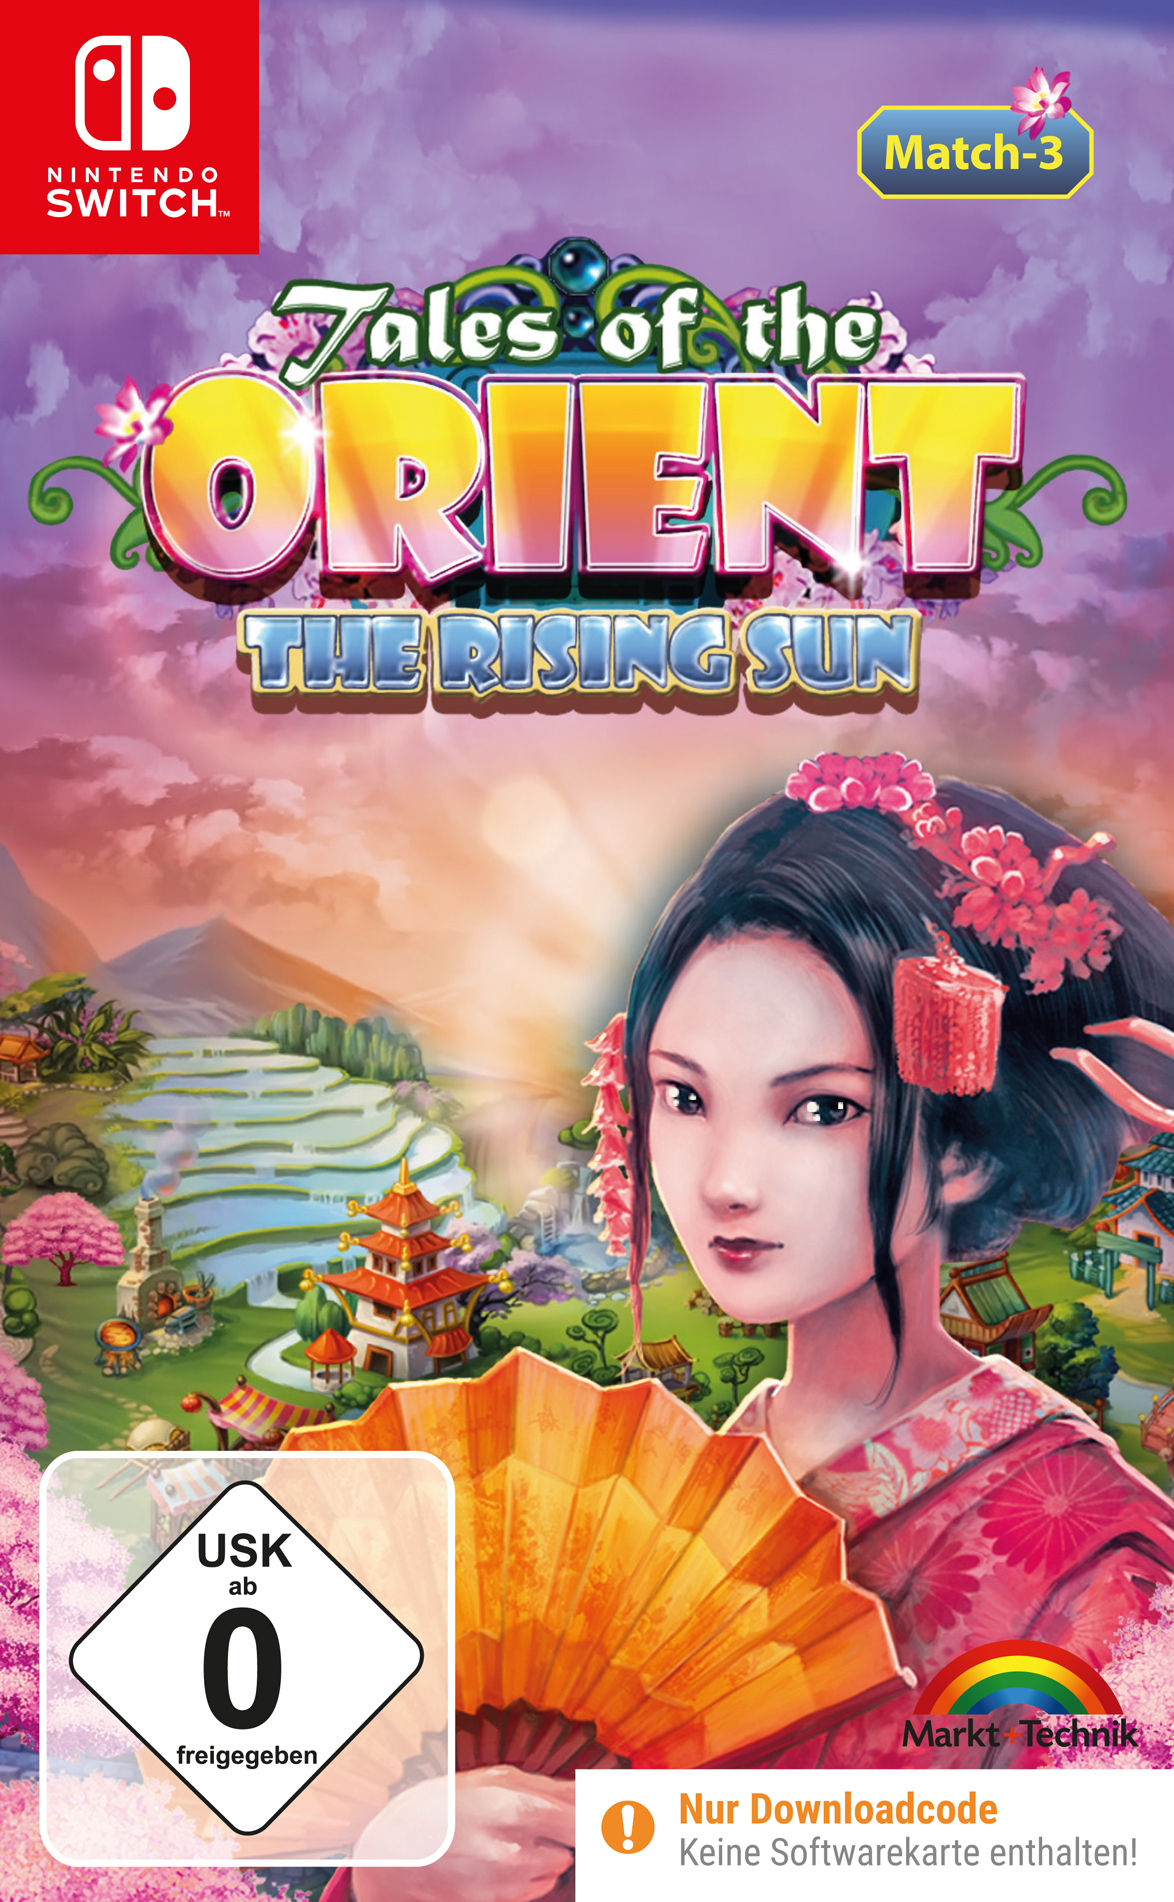 SW TALES CODE [Nintendo - OF ORIENT - Switch] THE